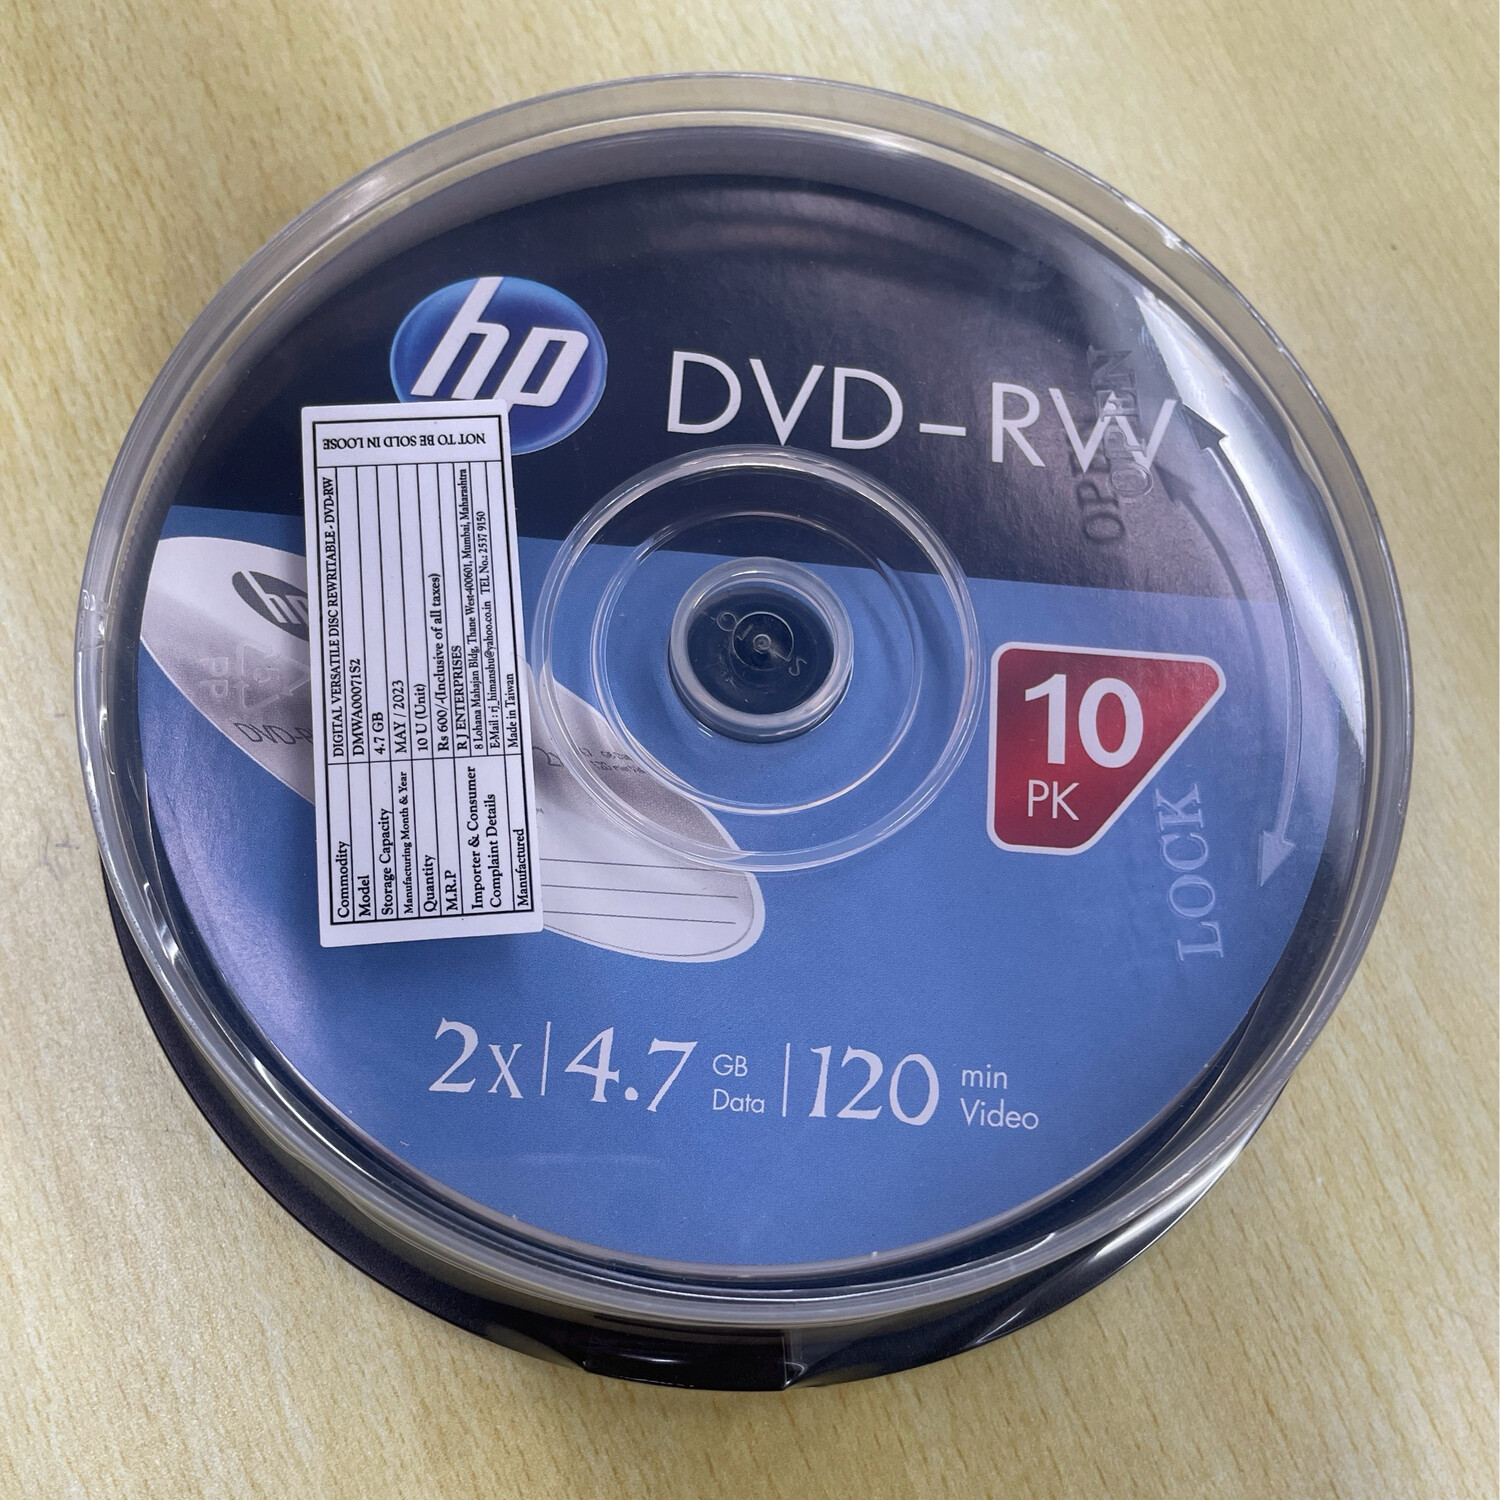 HP DVD-RW 4.7GB Blank Disk’s (Pack of 10disk)